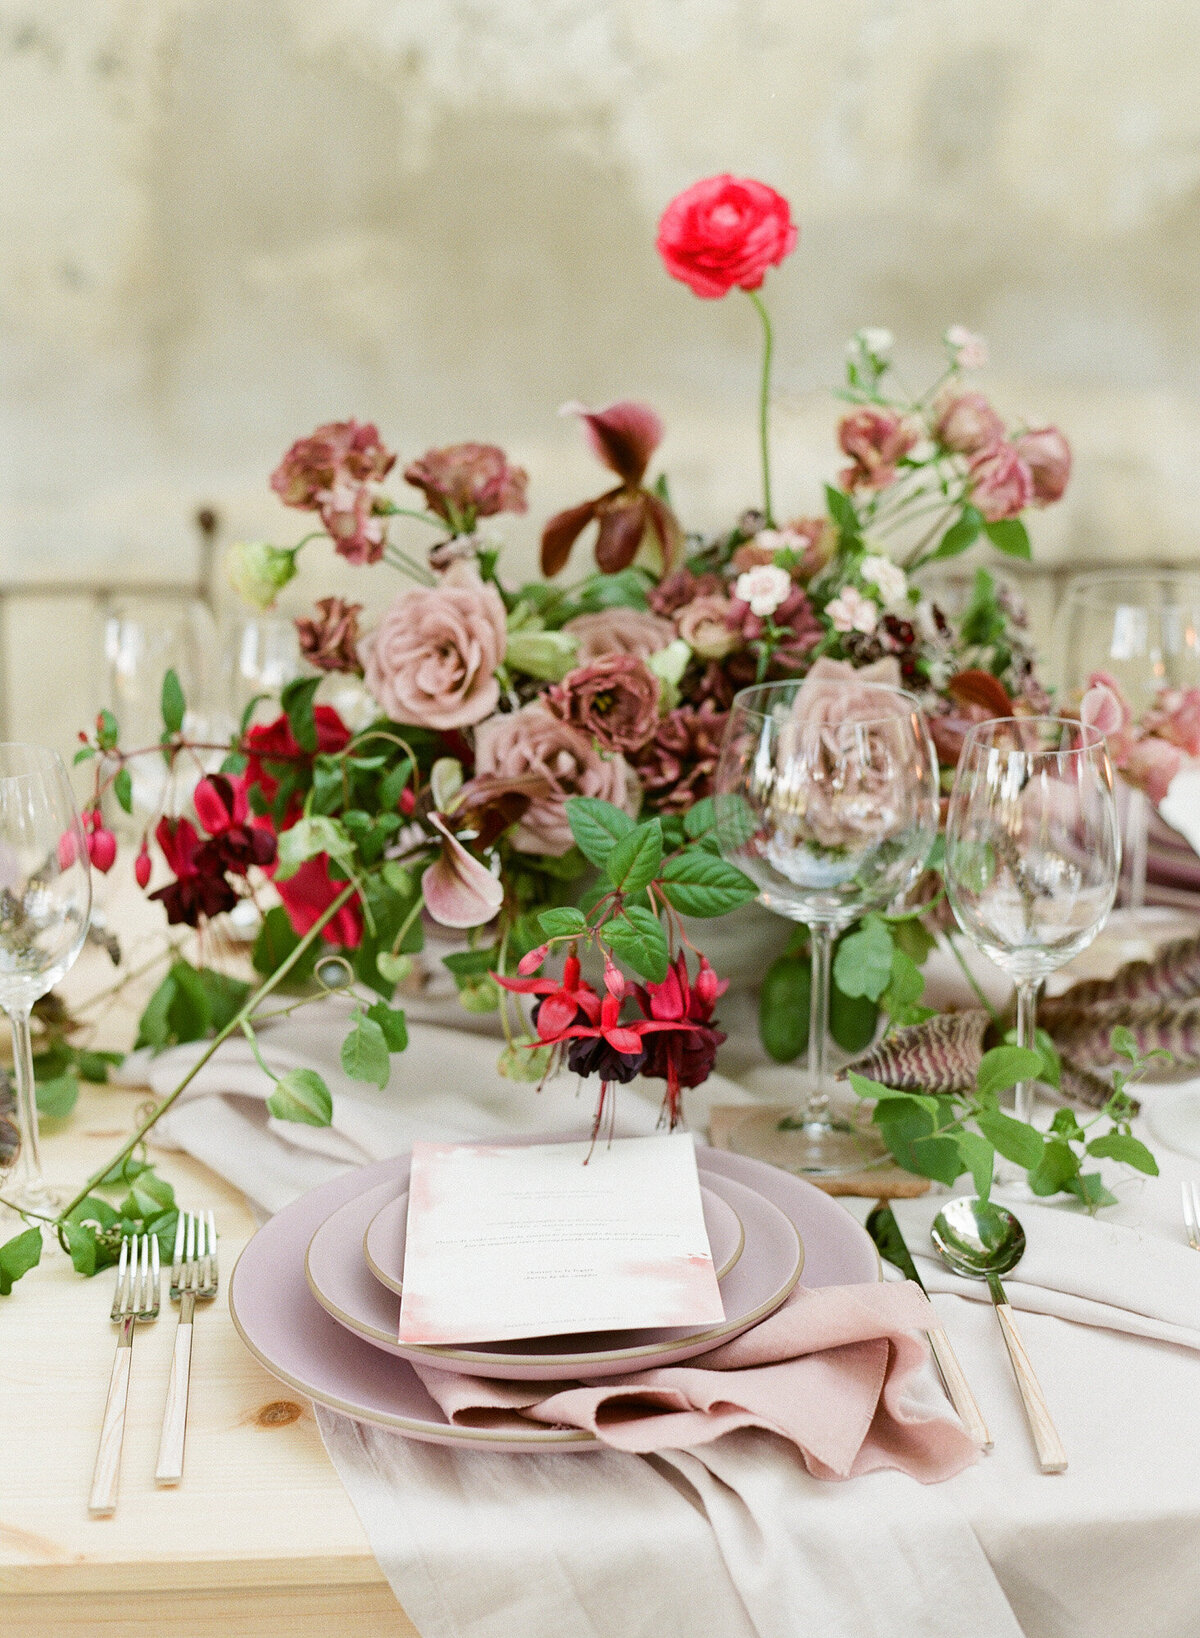 Stunning floral decoration at a tabletop with wine glasses and cutlery items.